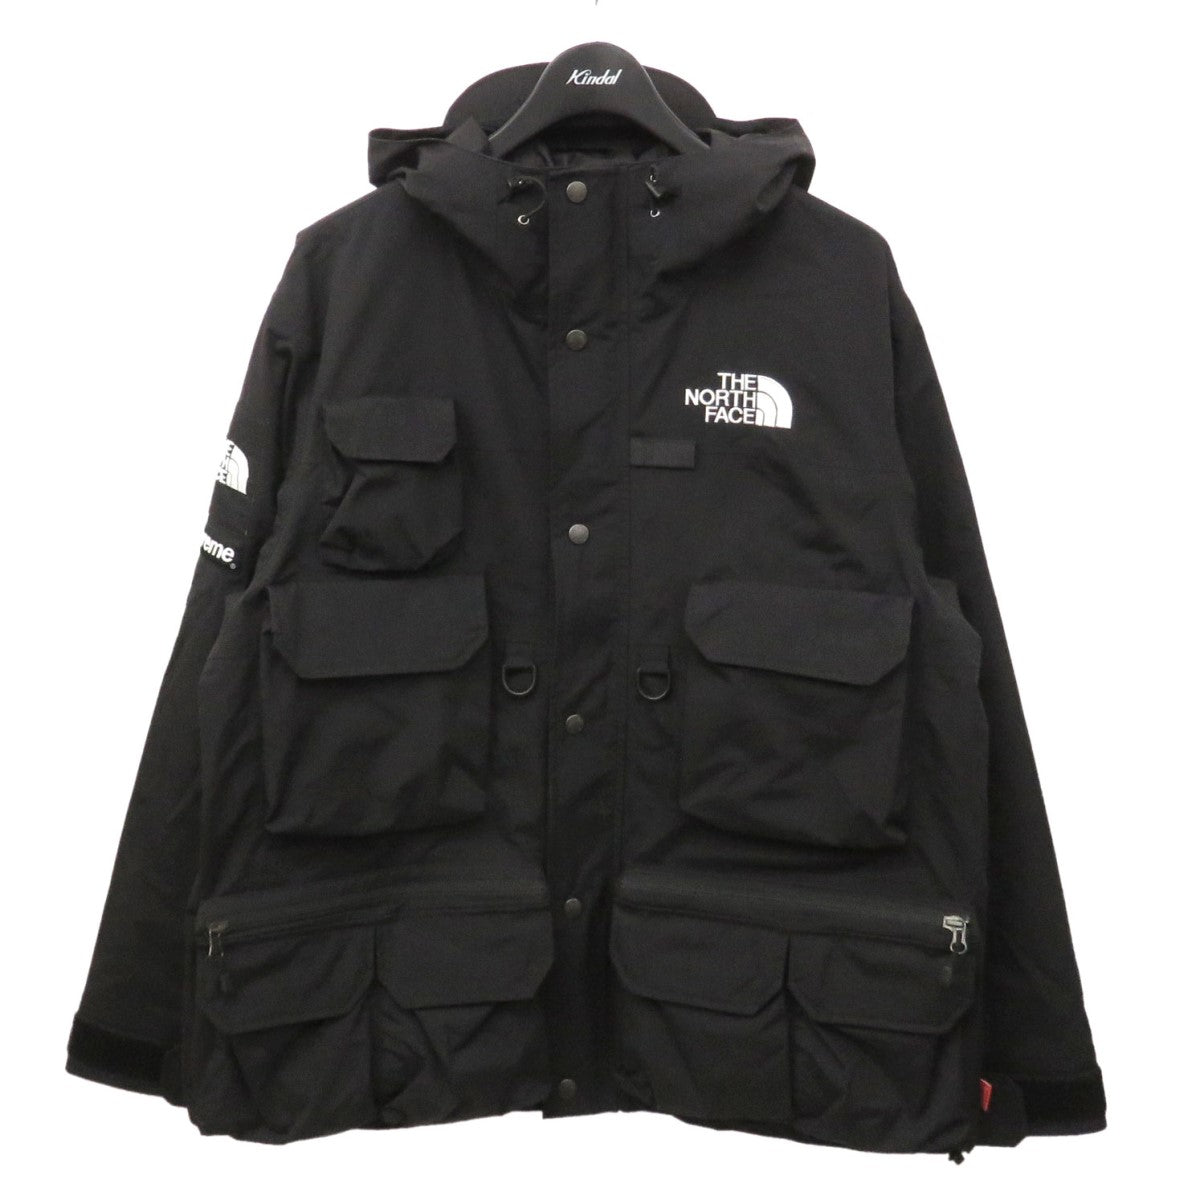 SUPREME×THE NORTH FACE 20SS Cargo Jacket カーゴ ジャケット ...